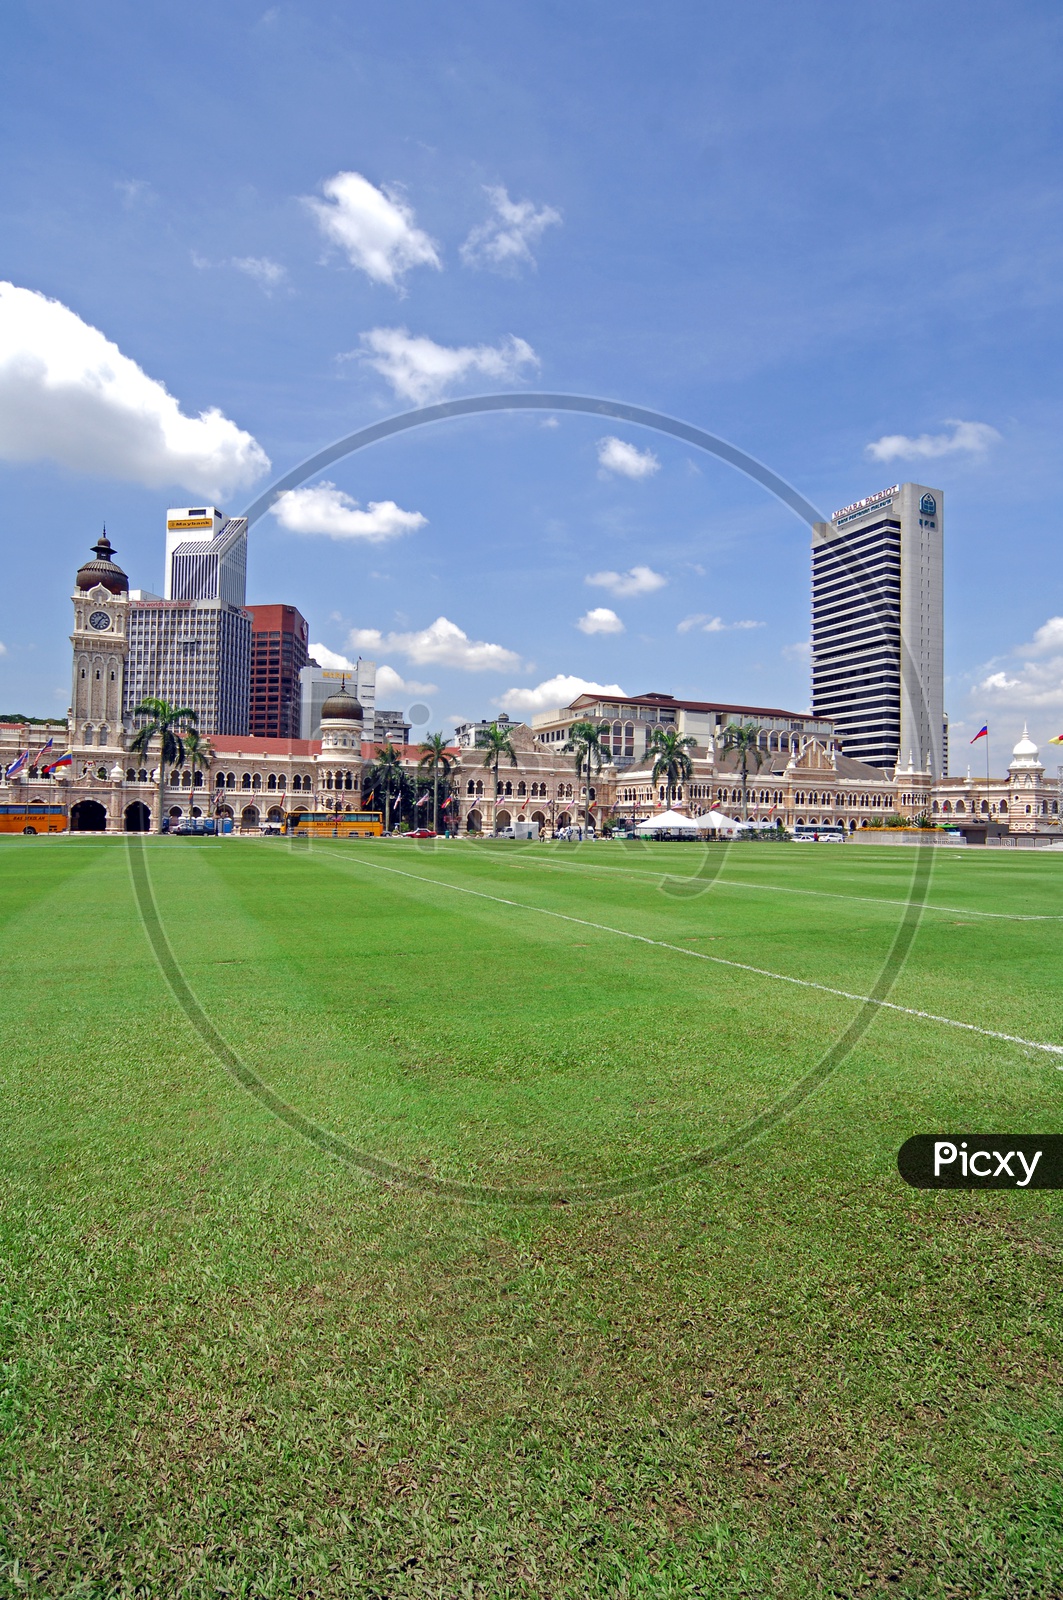 A View Of  Corporate buildings And Sultan Abdul Samad Building At Merdeka Square Park